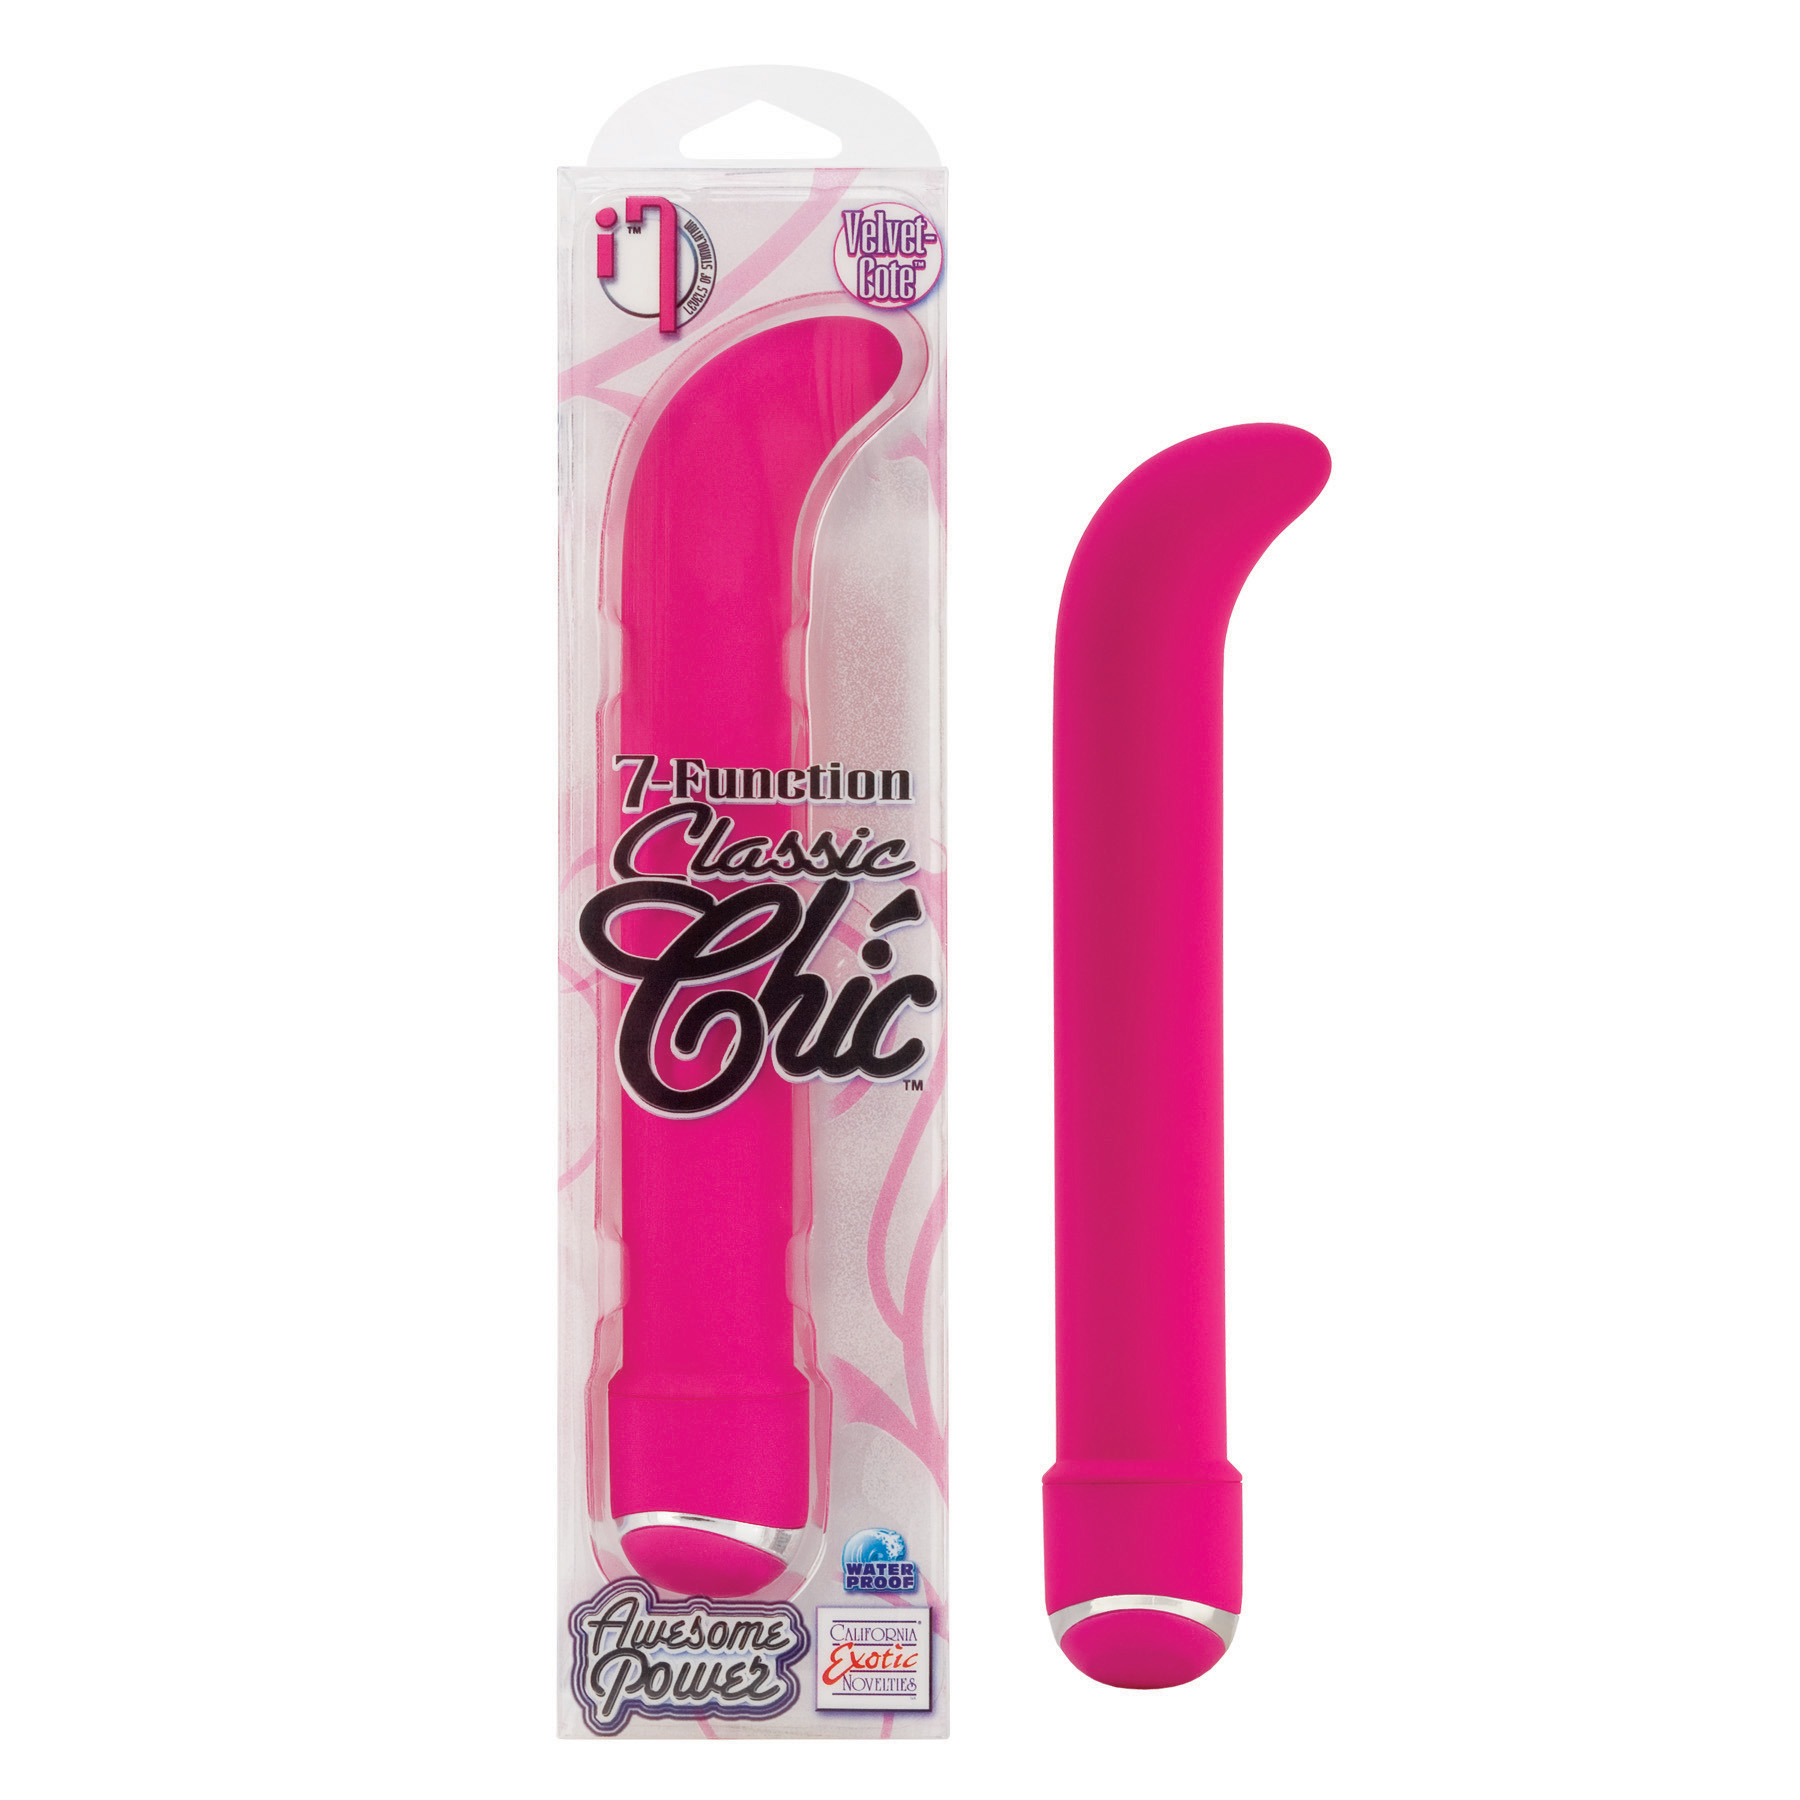 7 Function Classic Chic G-Spot Pink - SE049950